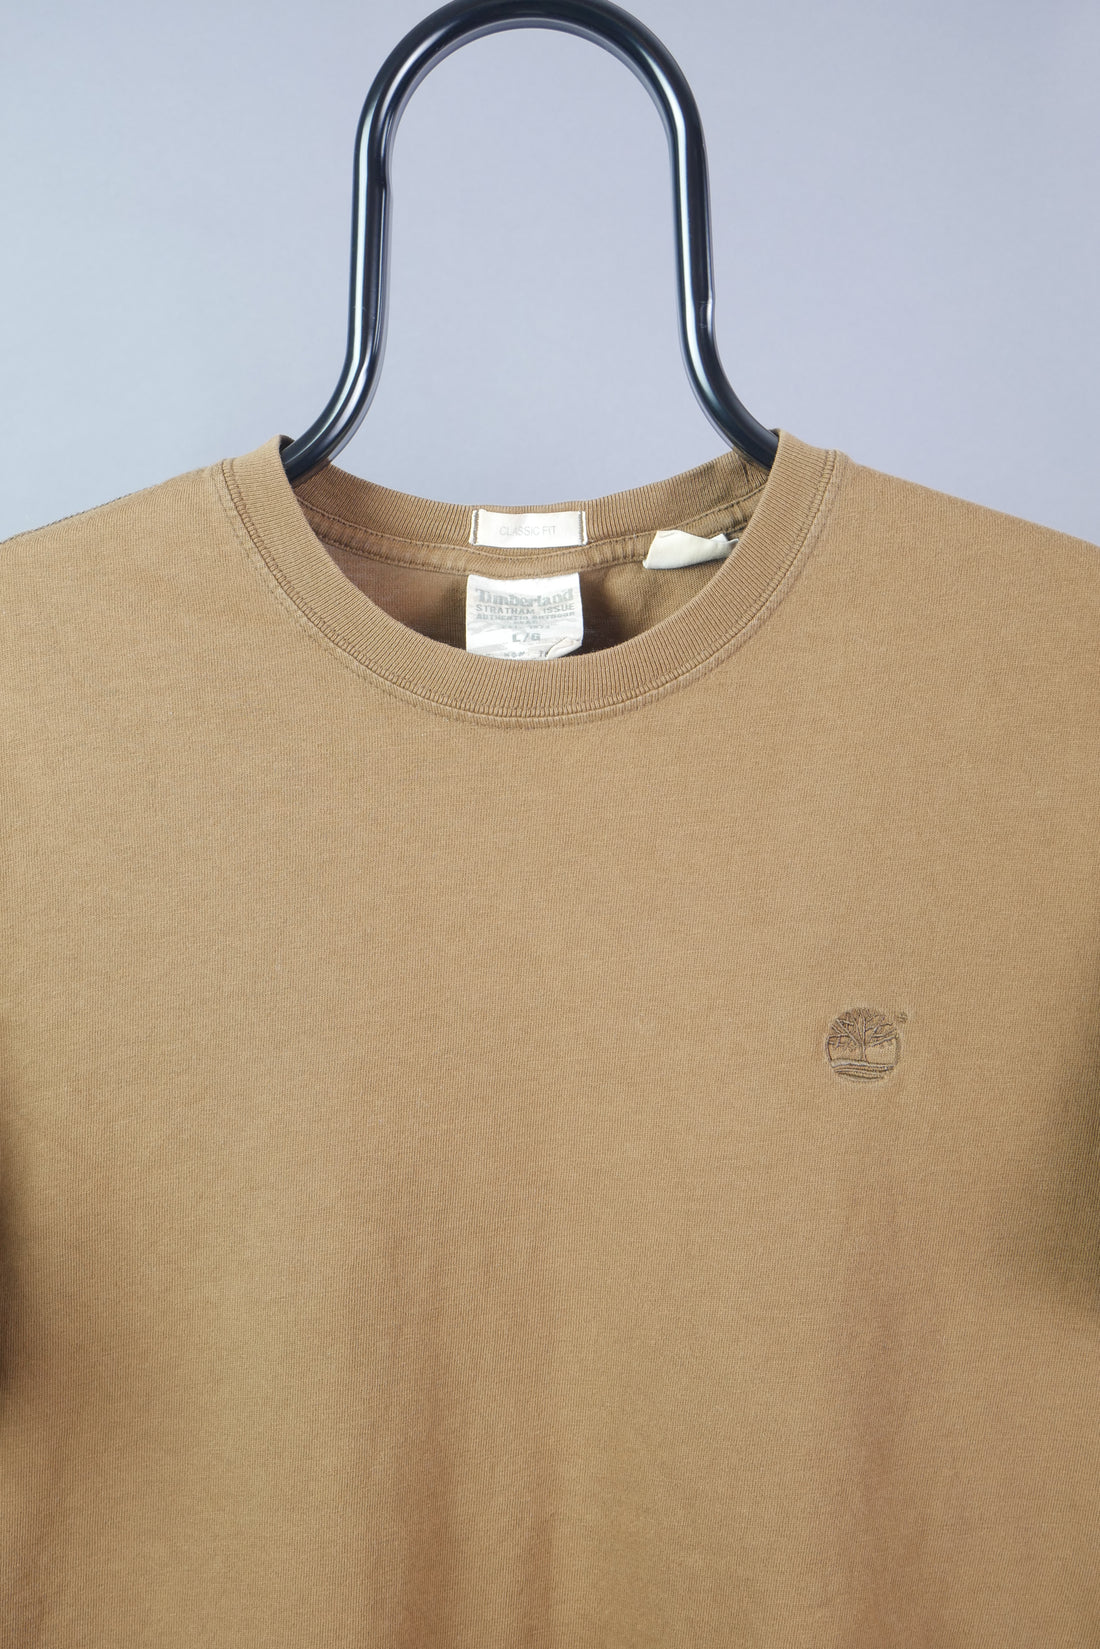 The Vintage Timberland T-Shirt (M)